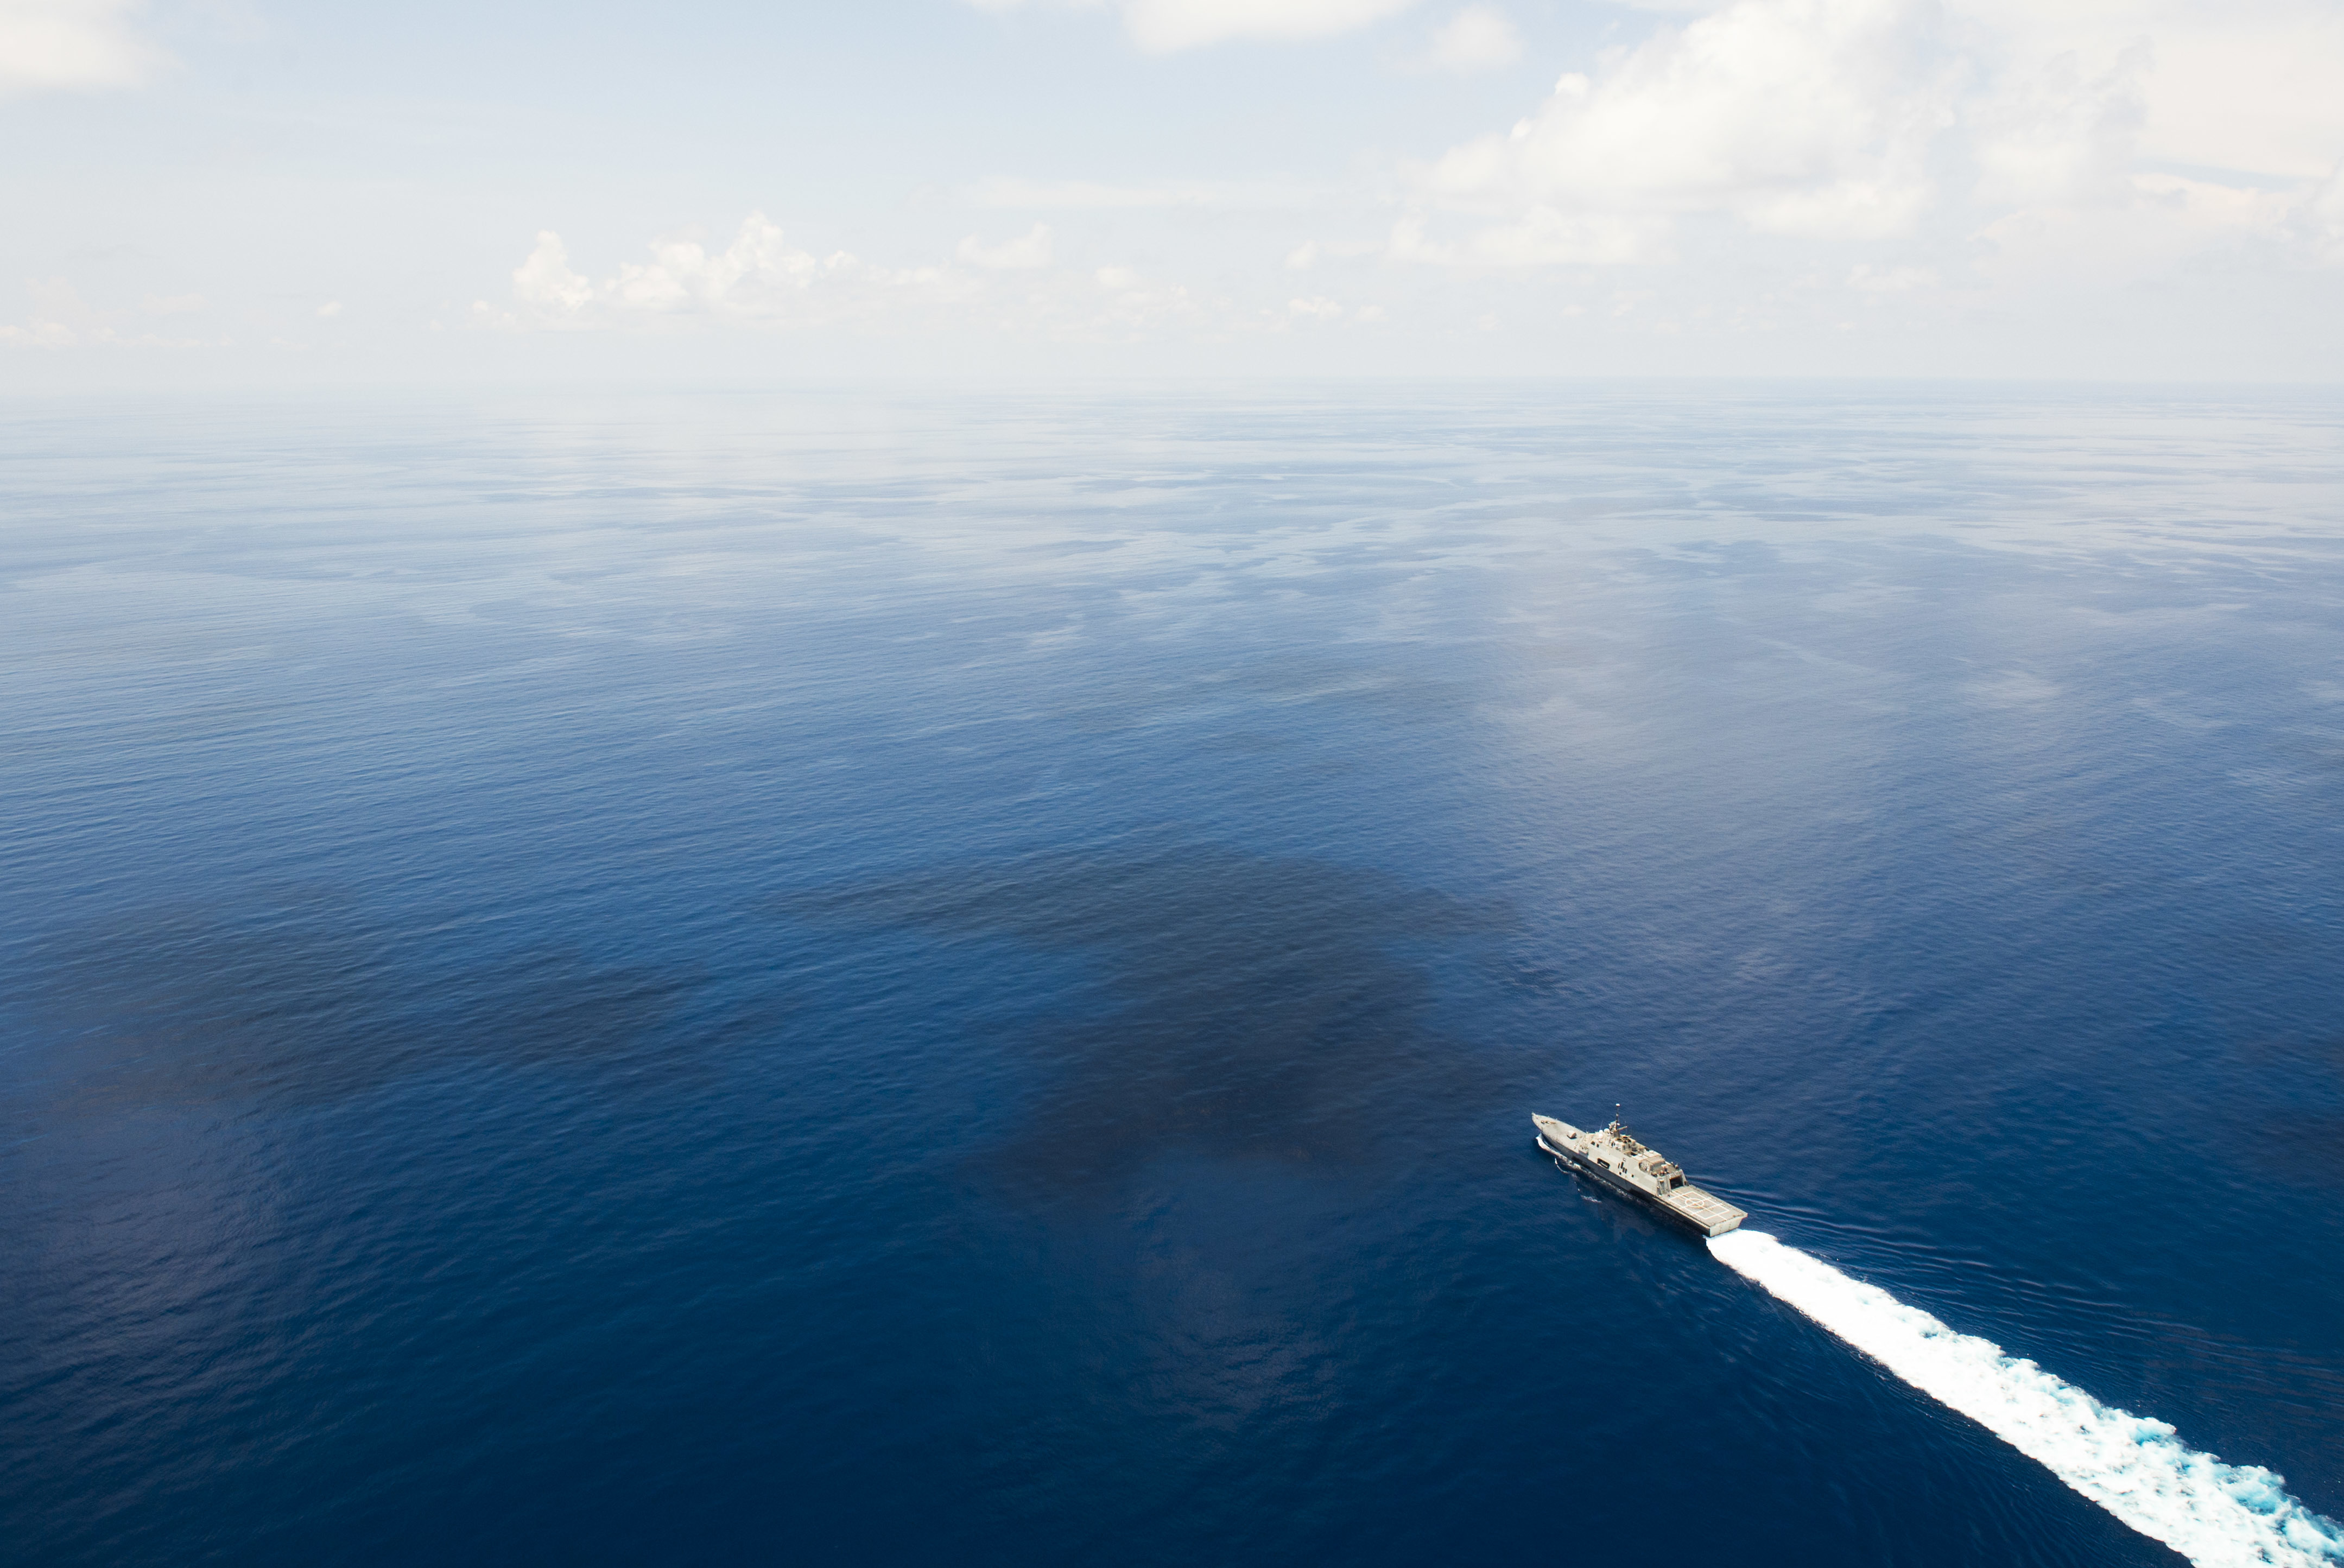 The littoral combat ship USS Fort Worth (LCS 3) conducts routine patrols in international waters of the South China Sea near the Spratly Islands as the People’s Liberation Army-Navy [PLA(N)] guided-missile frigate Yancheng (FFG 546) sails close behind, on May 11, 2015. US Navy photo. 